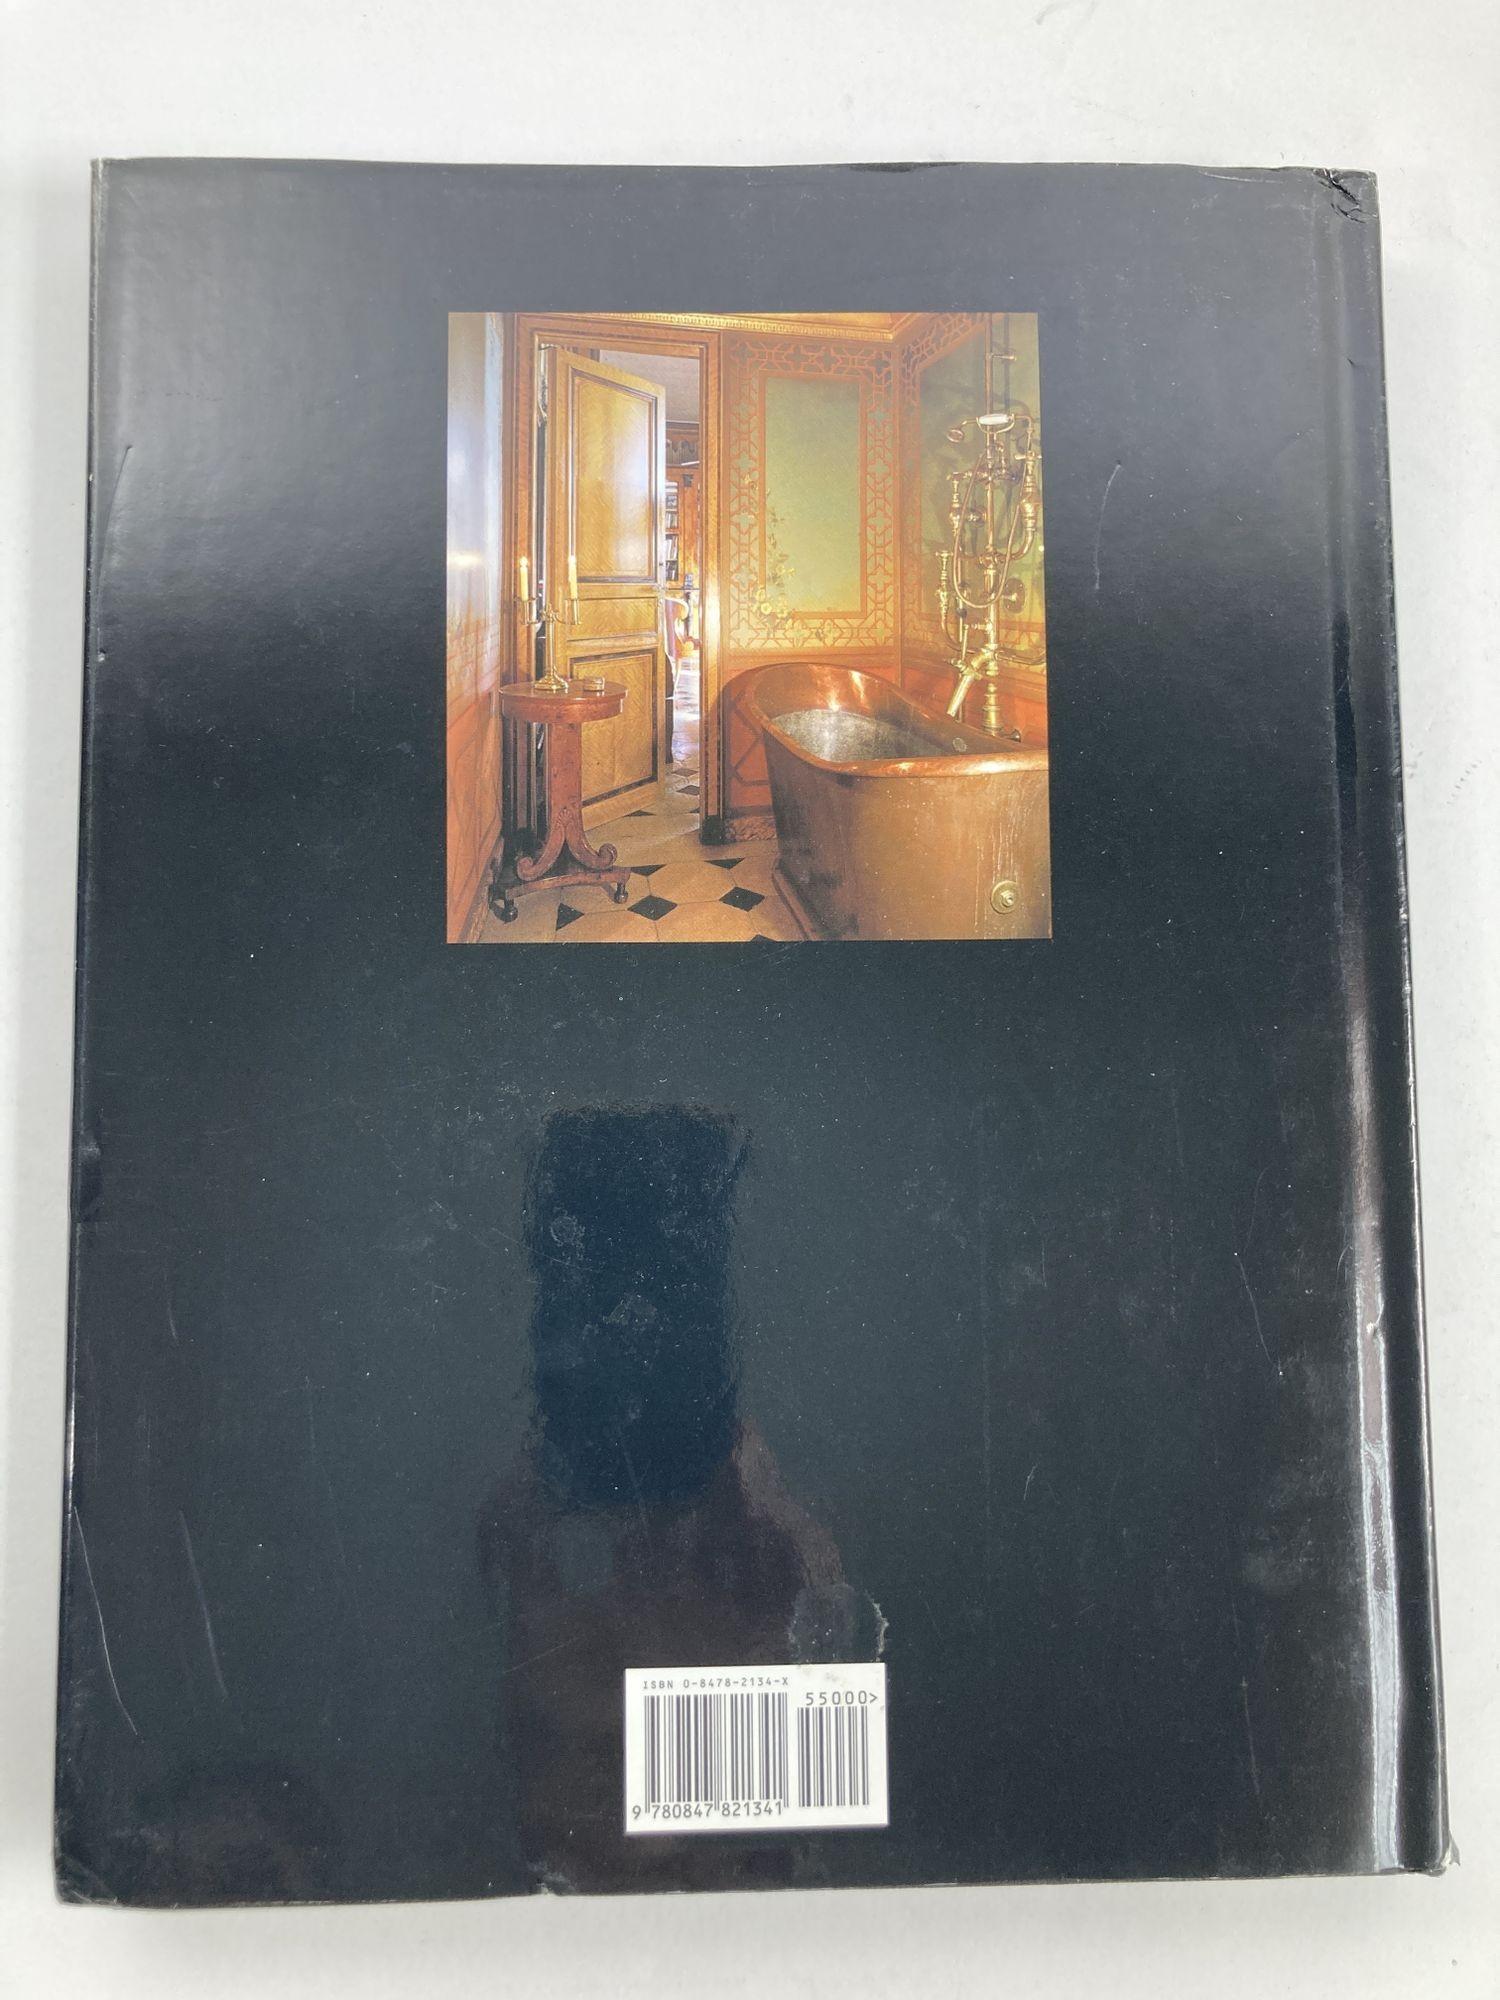 The Book of the Bath Hardcover 1998 by Francoise De Bonneville In Good Condition For Sale In North Hollywood, CA